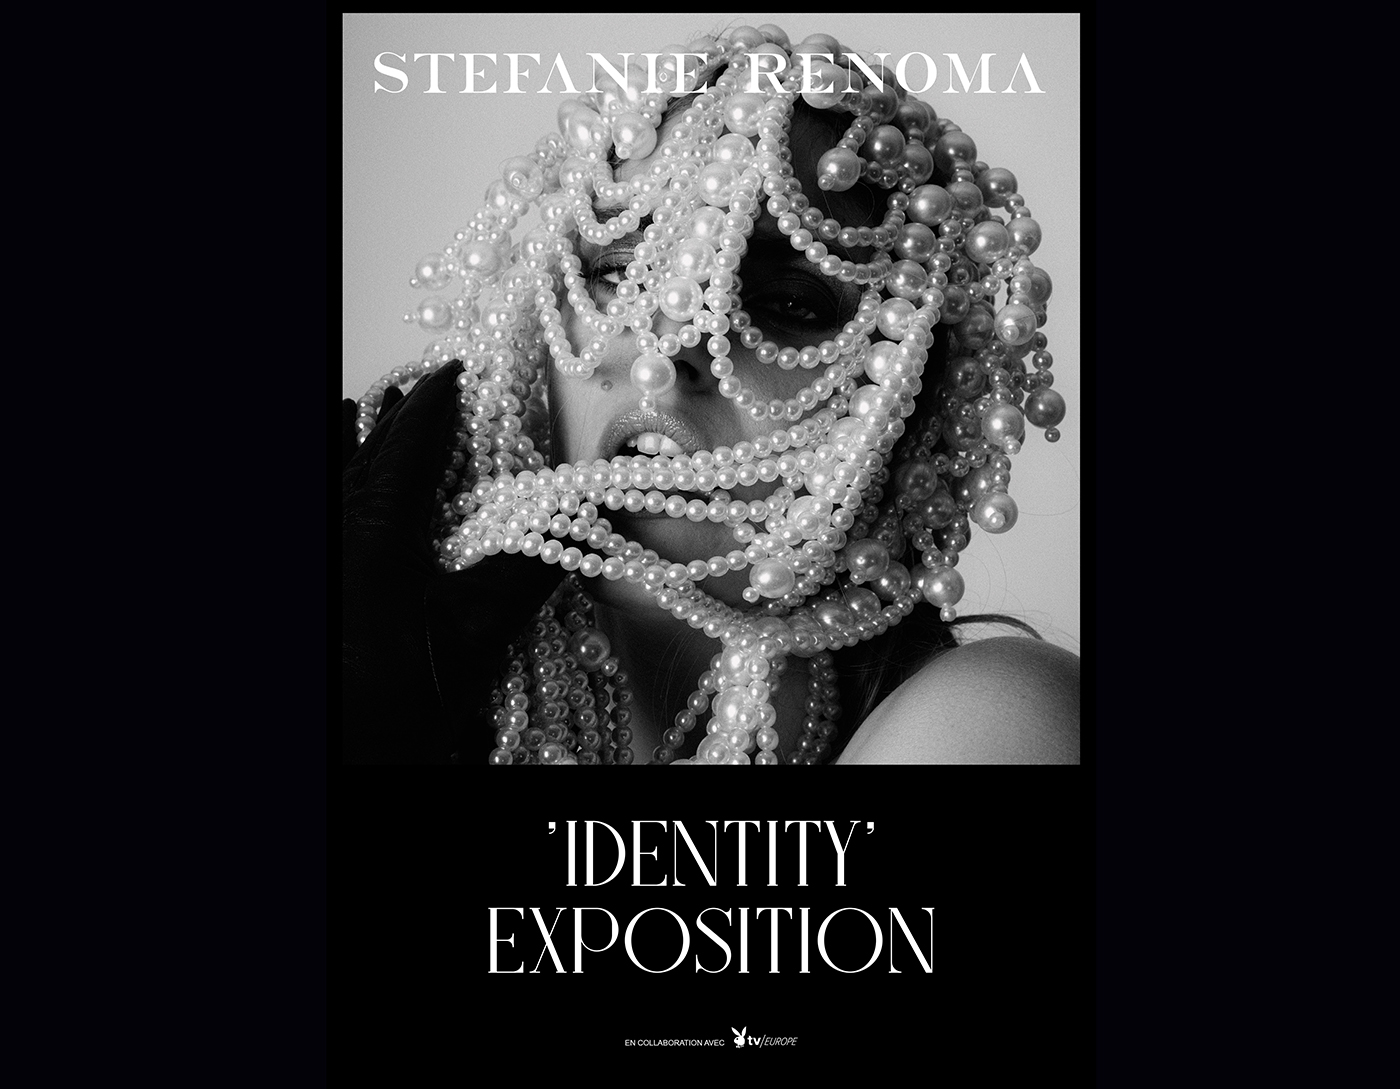 "Identity" exposition by Stéfanie Renoma in collaboration with Playboy TV Europe